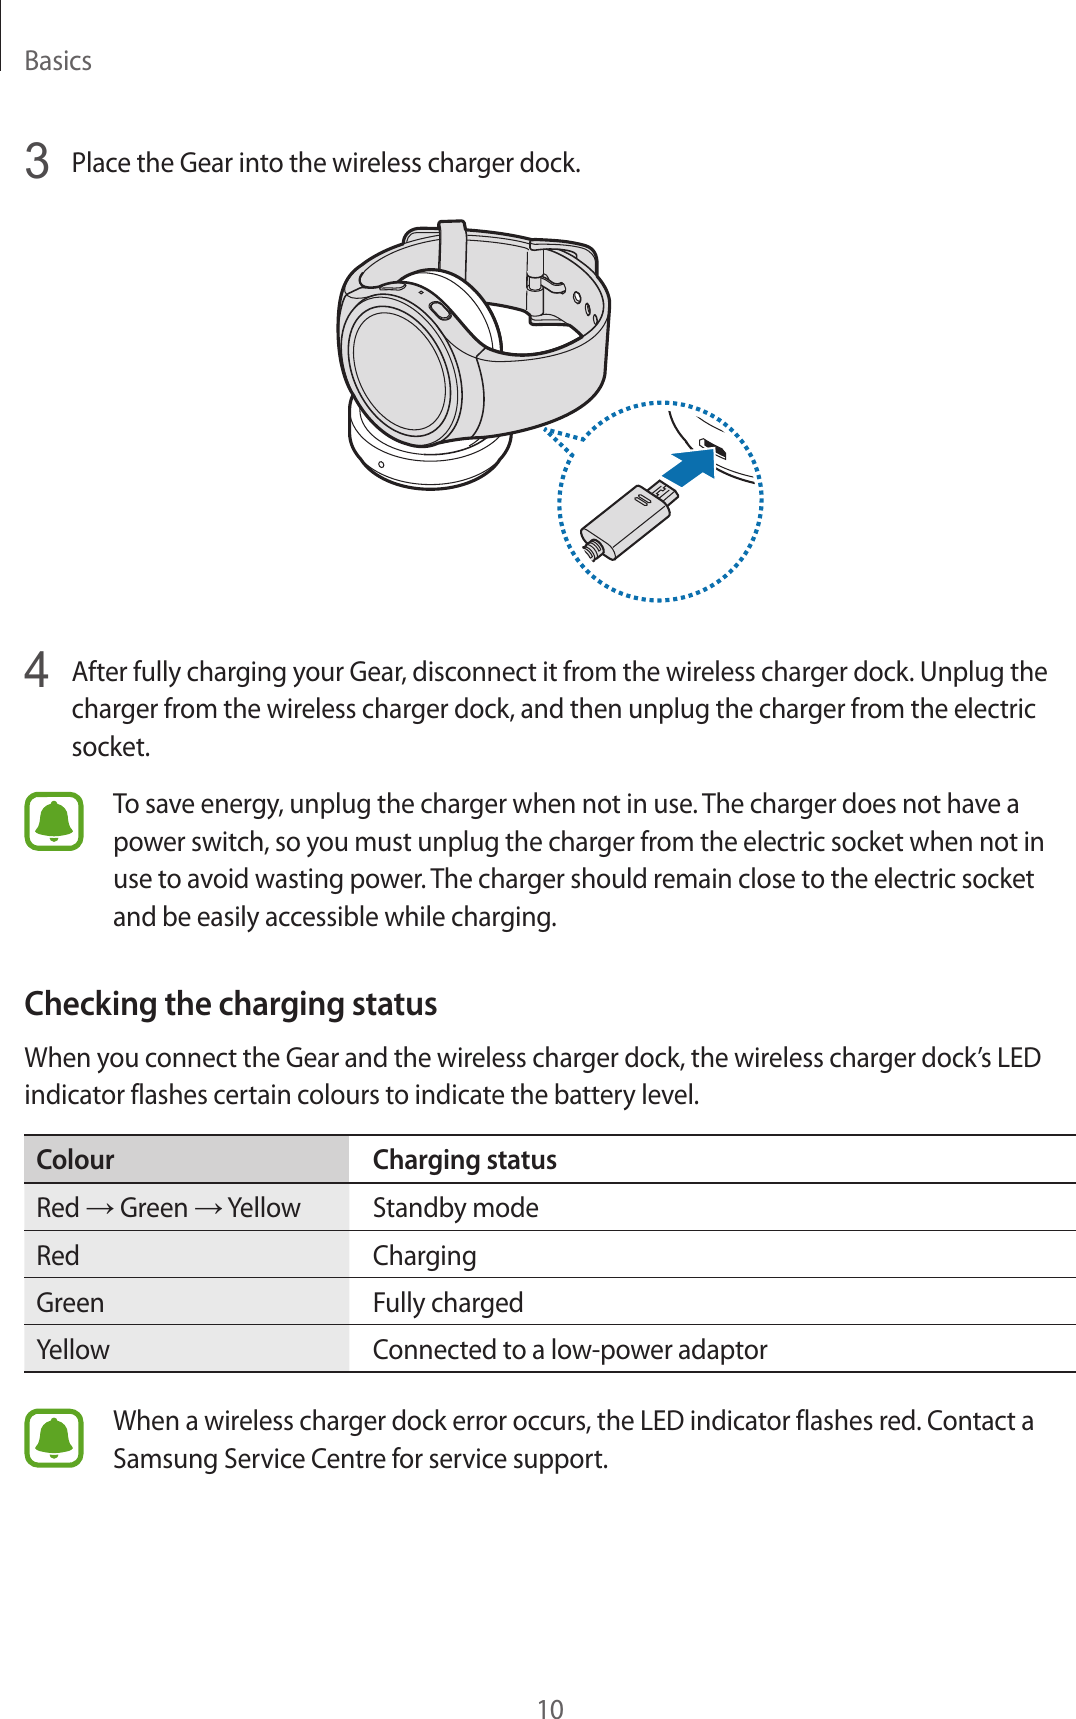 Basics103  Place the Gear into the wireless charger dock.4  After fully charging your Gear, disconnect it from the wireless charger dock. Unplug the charger from the wireless charger dock, and then unplug the charger from the electric socket.To save energy, unplug the charger when not in use. The charger does not have a power switch, so you must unplug the charger from the electric socket when not in use to avoid wasting power. The charger should remain close to the electric socket and be easily accessible while charging.Checking the charging statusWhen you connect the Gear and the wireless charger dock, the wireless charger dock’s LED indicator flashes certain colours to indicate the battery level.Colour Charging statusRed → Green → Yellow Standby modeRed ChargingGreen Fully chargedYellow Connected to a low-power adaptorWhen a wireless charger dock error occurs, the LED indicator flashes red. Contact a Samsung Service Centre for service support.